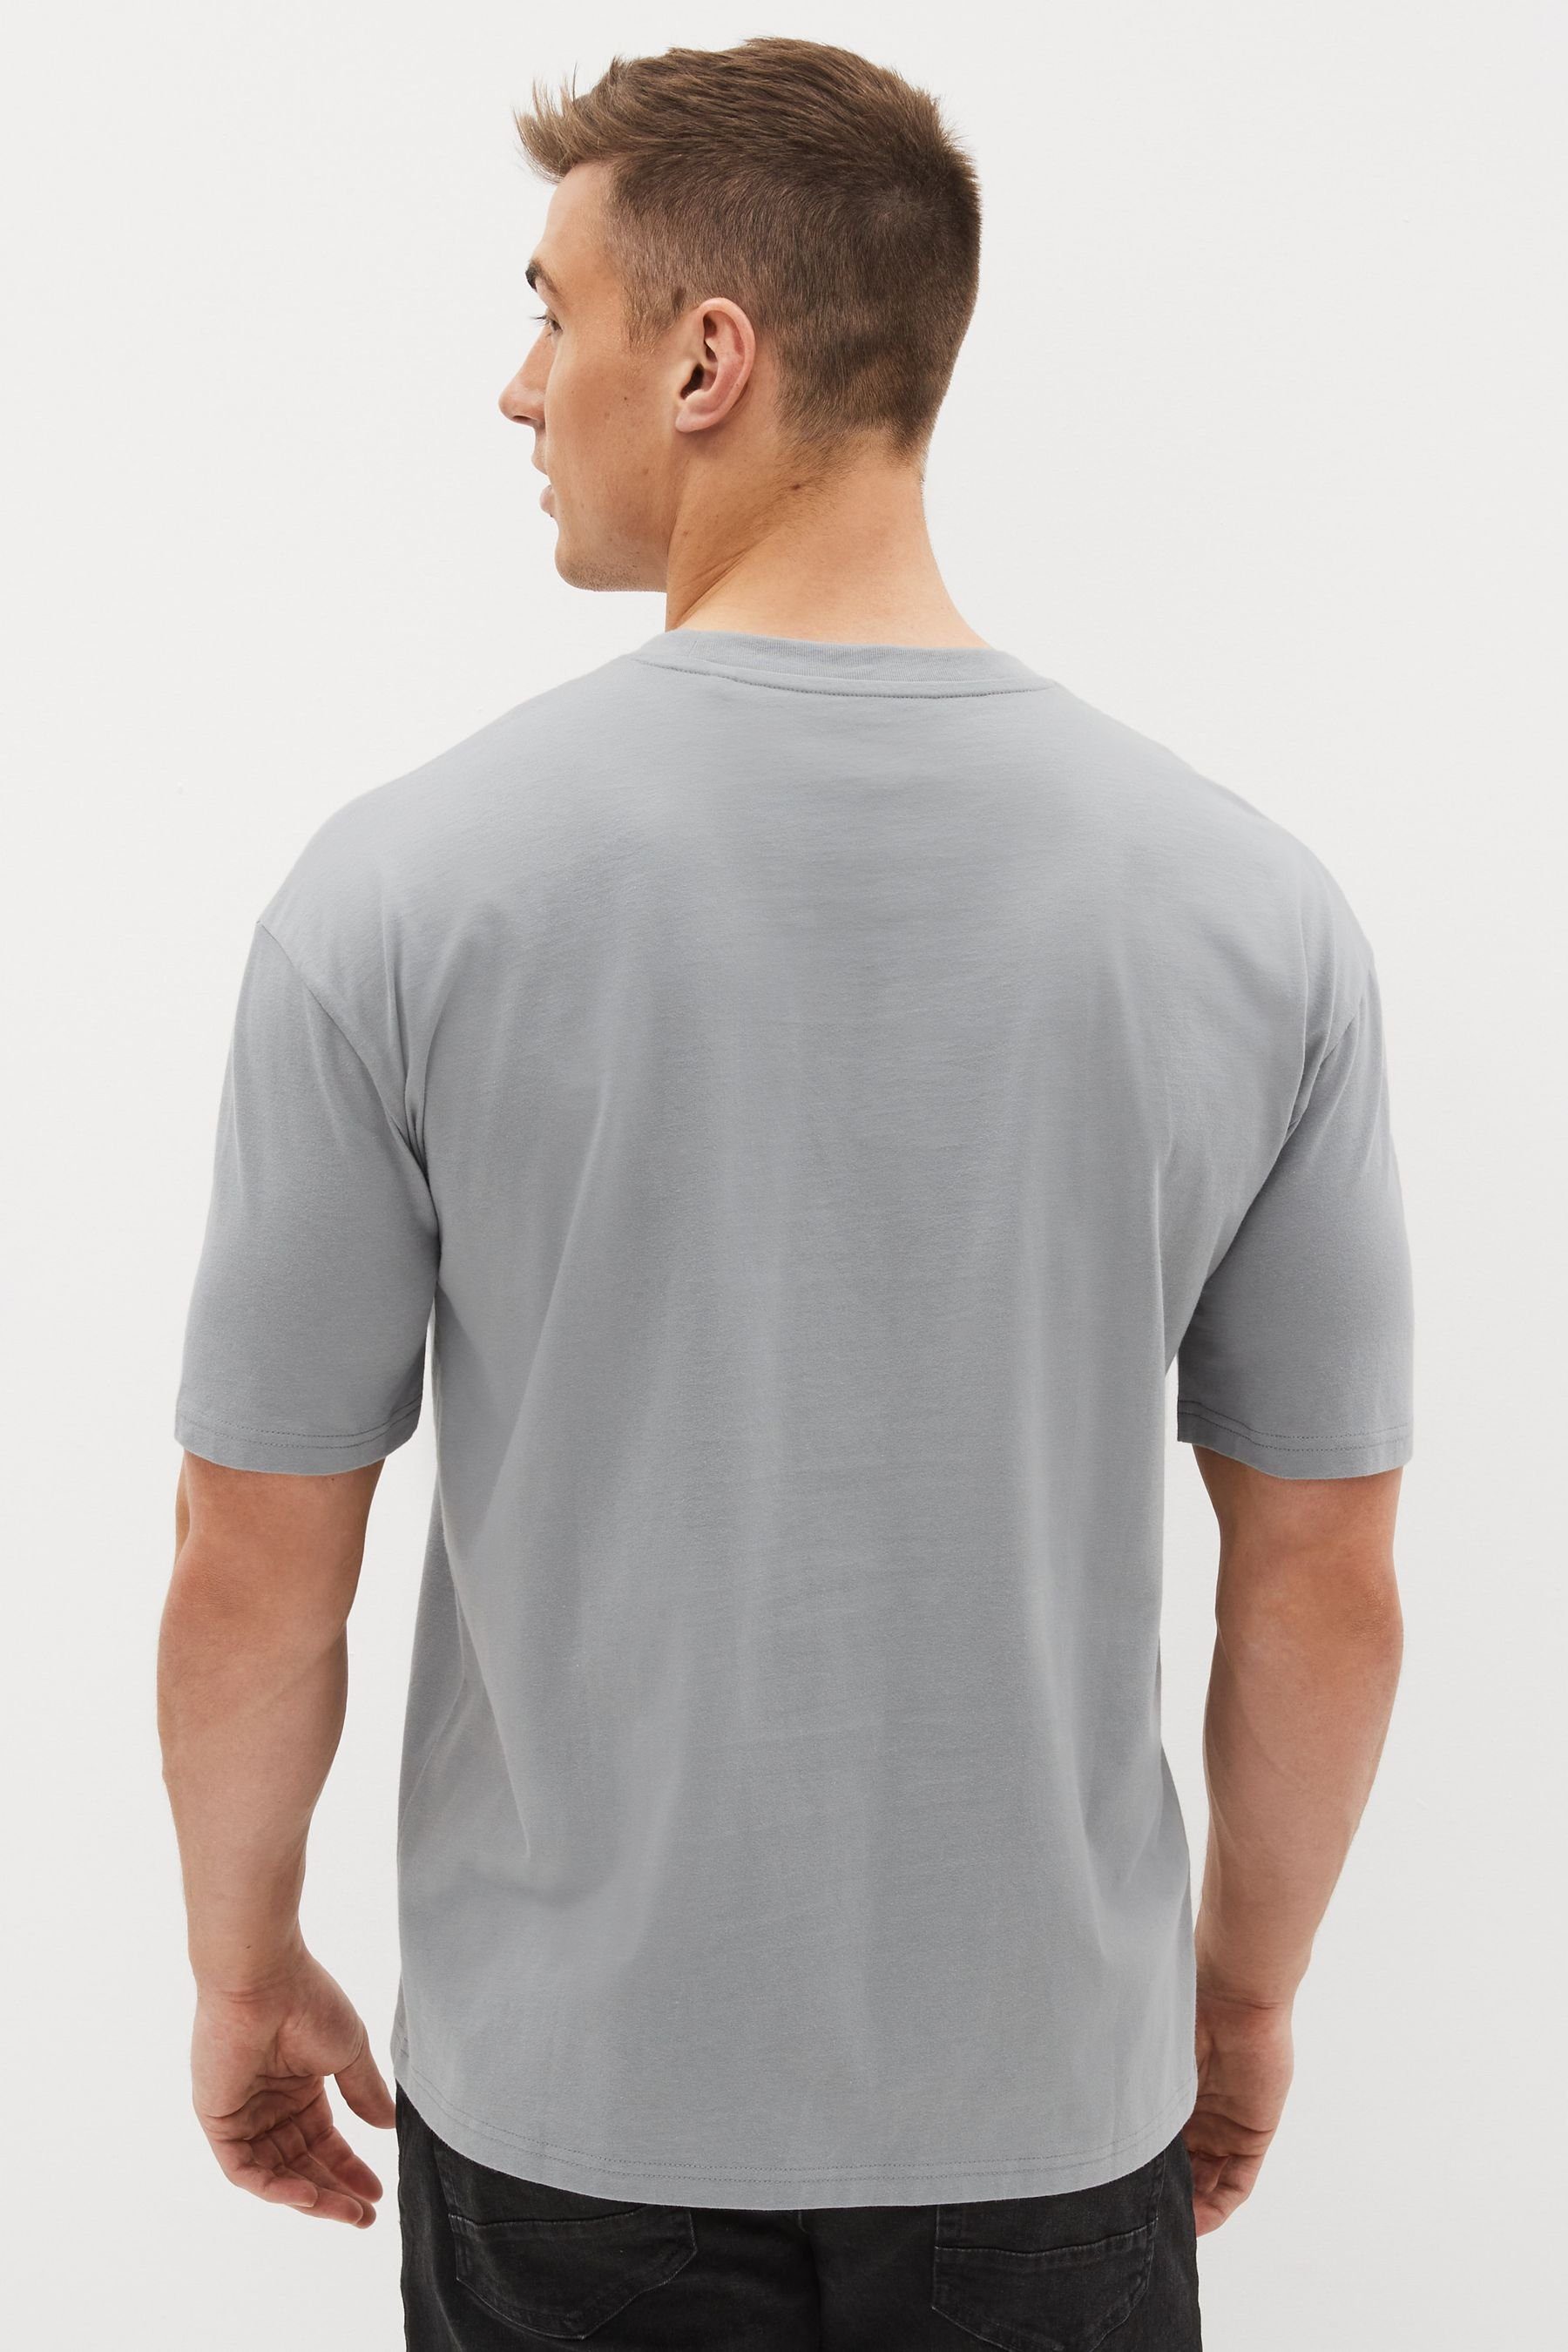 Grey Relaxed Rundhals-T-Shirt (1-tlg) im Fit Next T-Shirt Silver